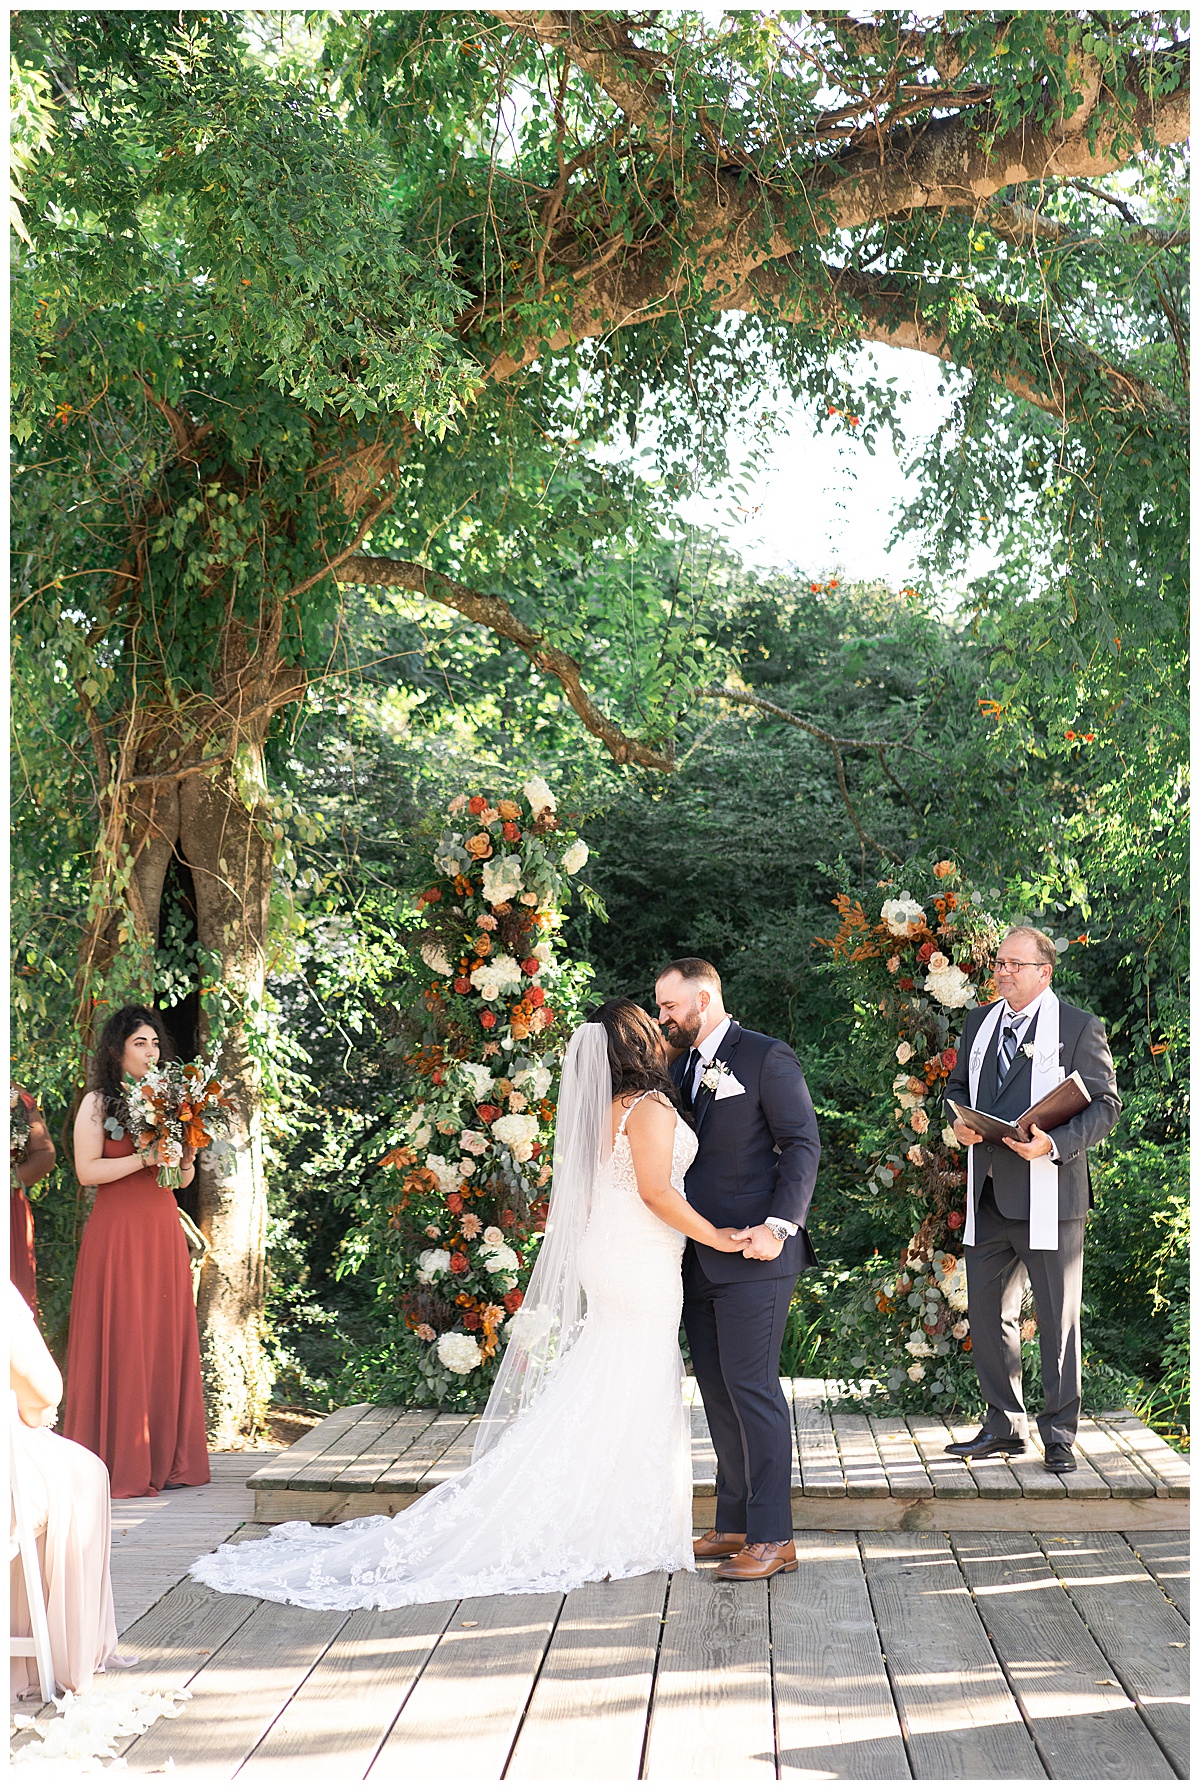 Couple share their first kiss at The Bowery House & Gardens